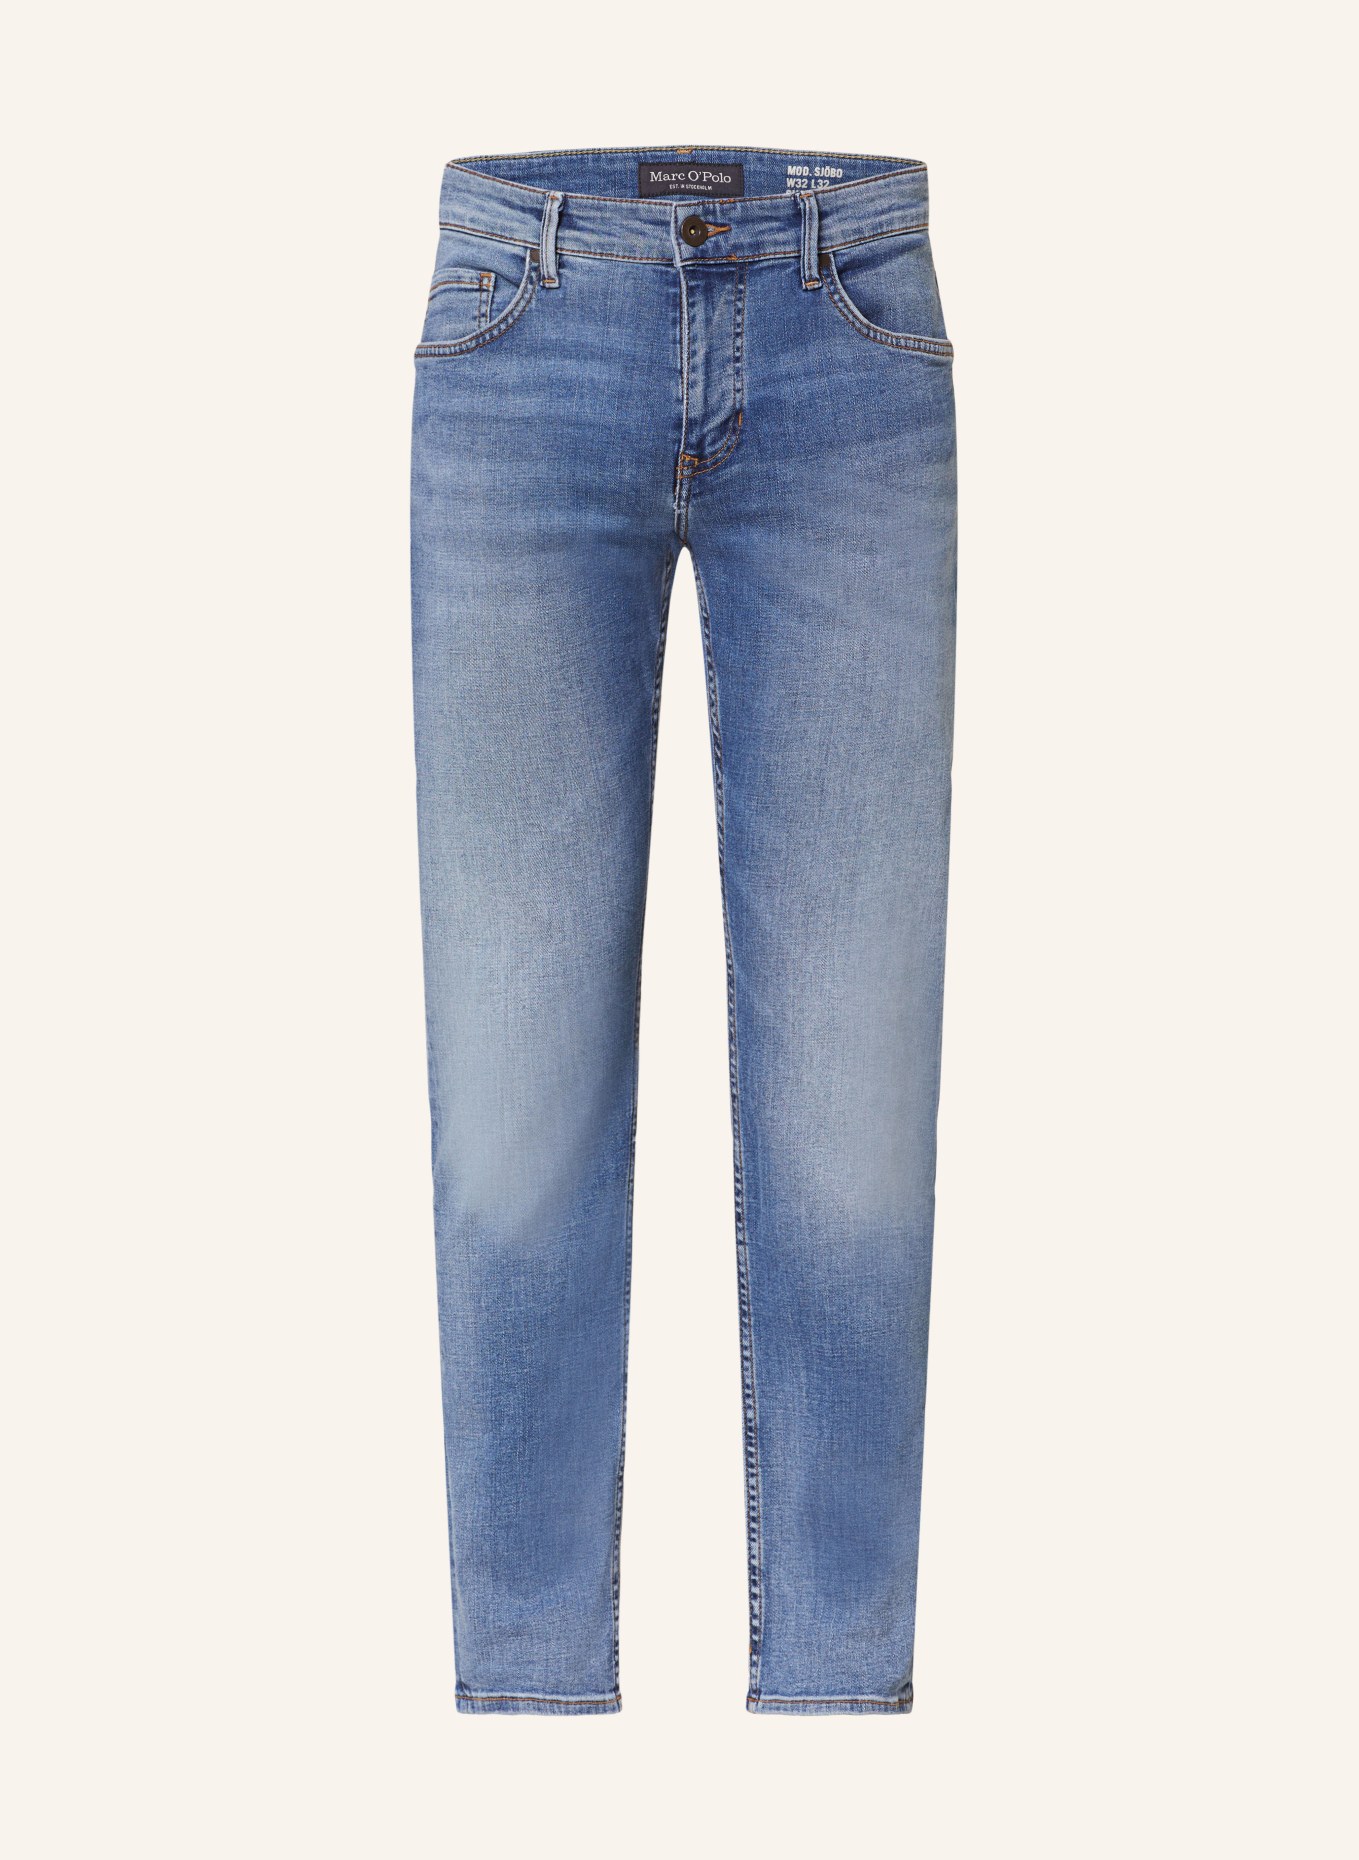 Marc O'Polo Jeans shaped fit, Color: 051 authentic mid (Image 1)